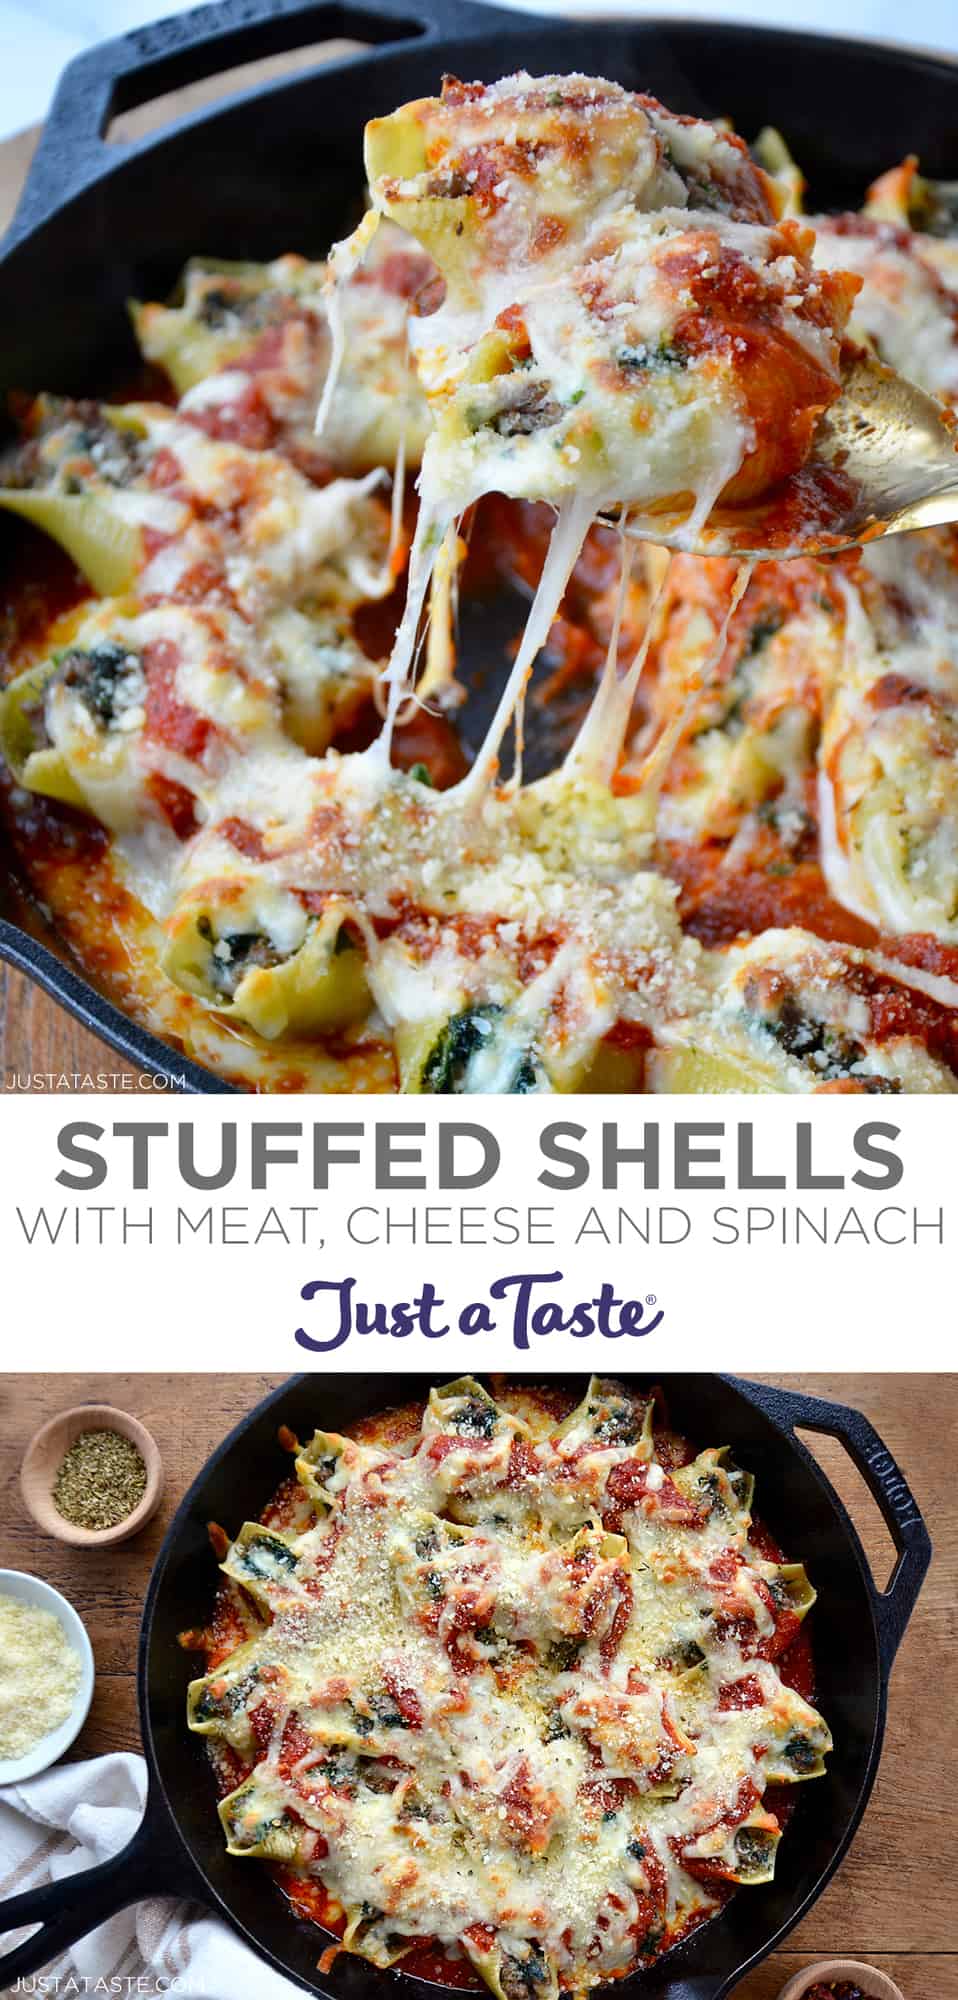 Stuffed Shells with Meat, Cheese and Spinach - Just a Taste